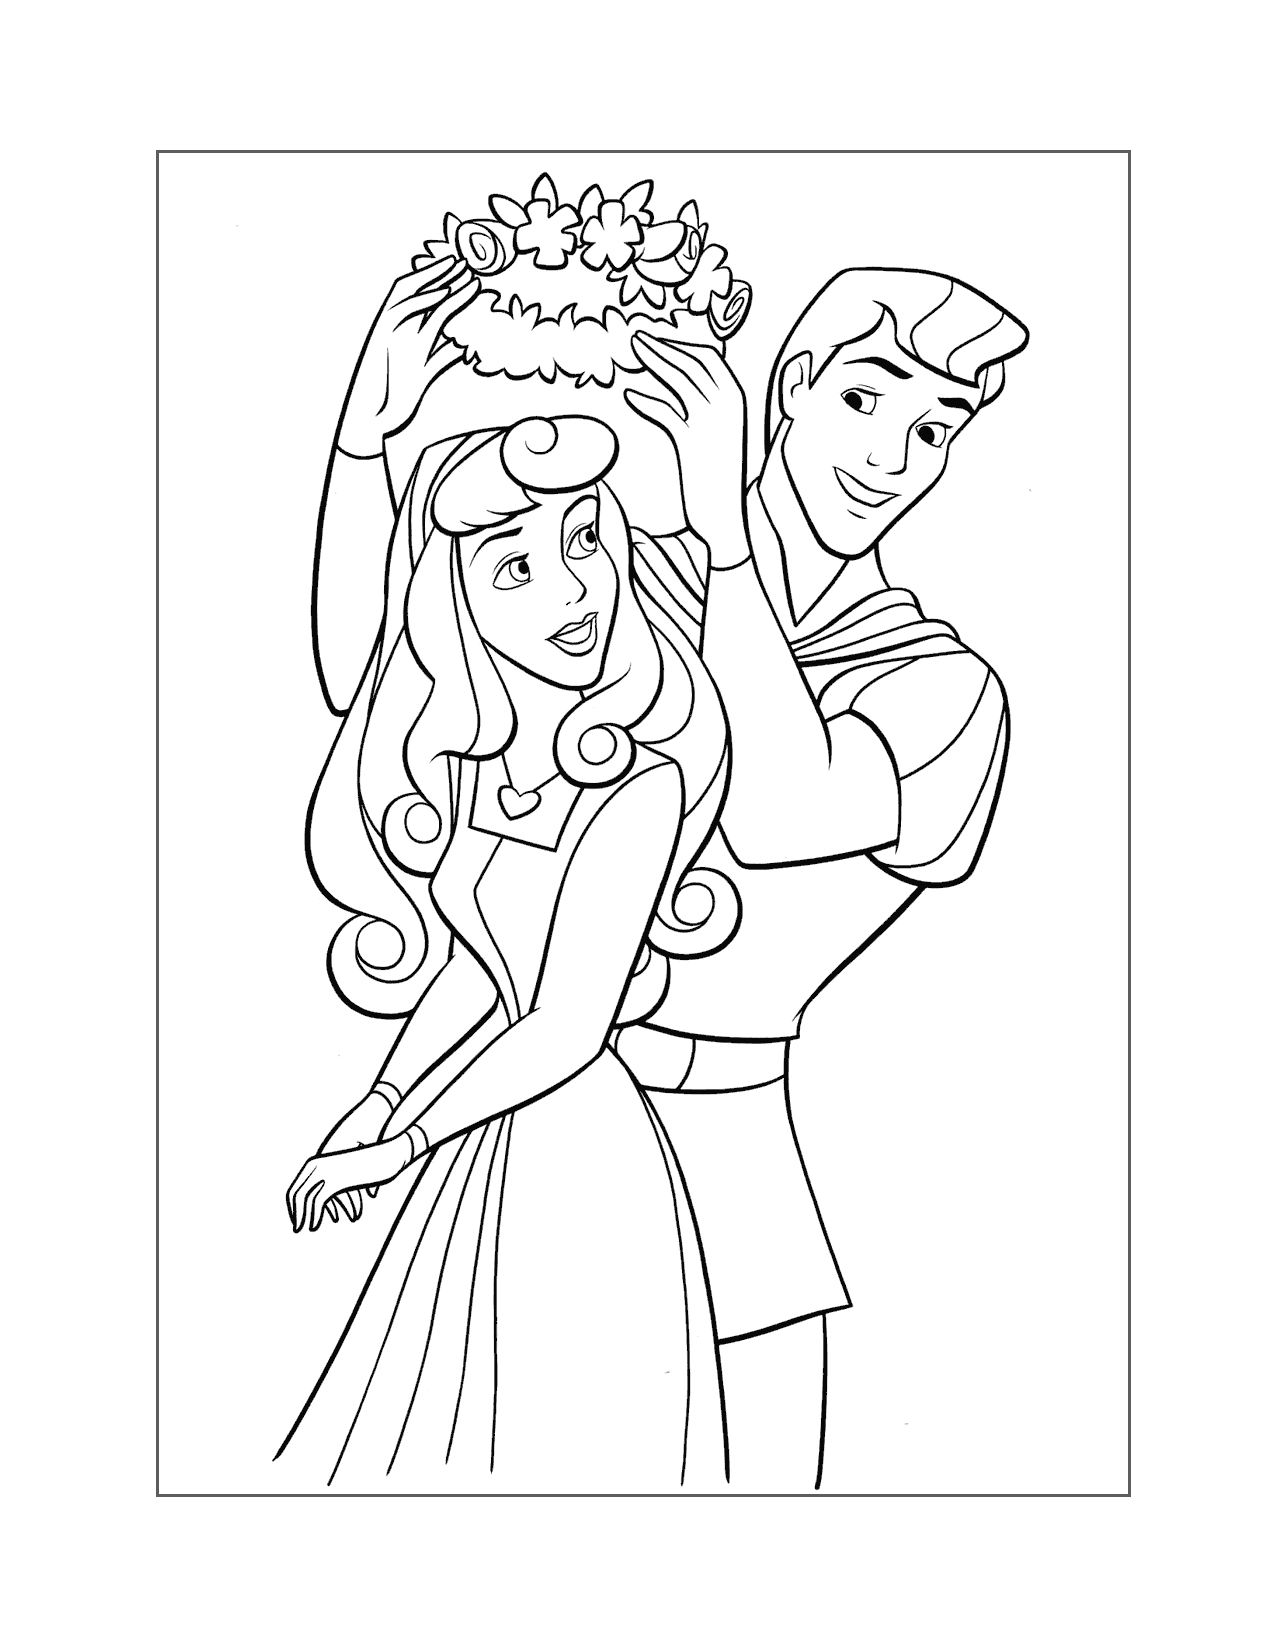 Phillip Places Flowers On Auroras Head Coloring Page